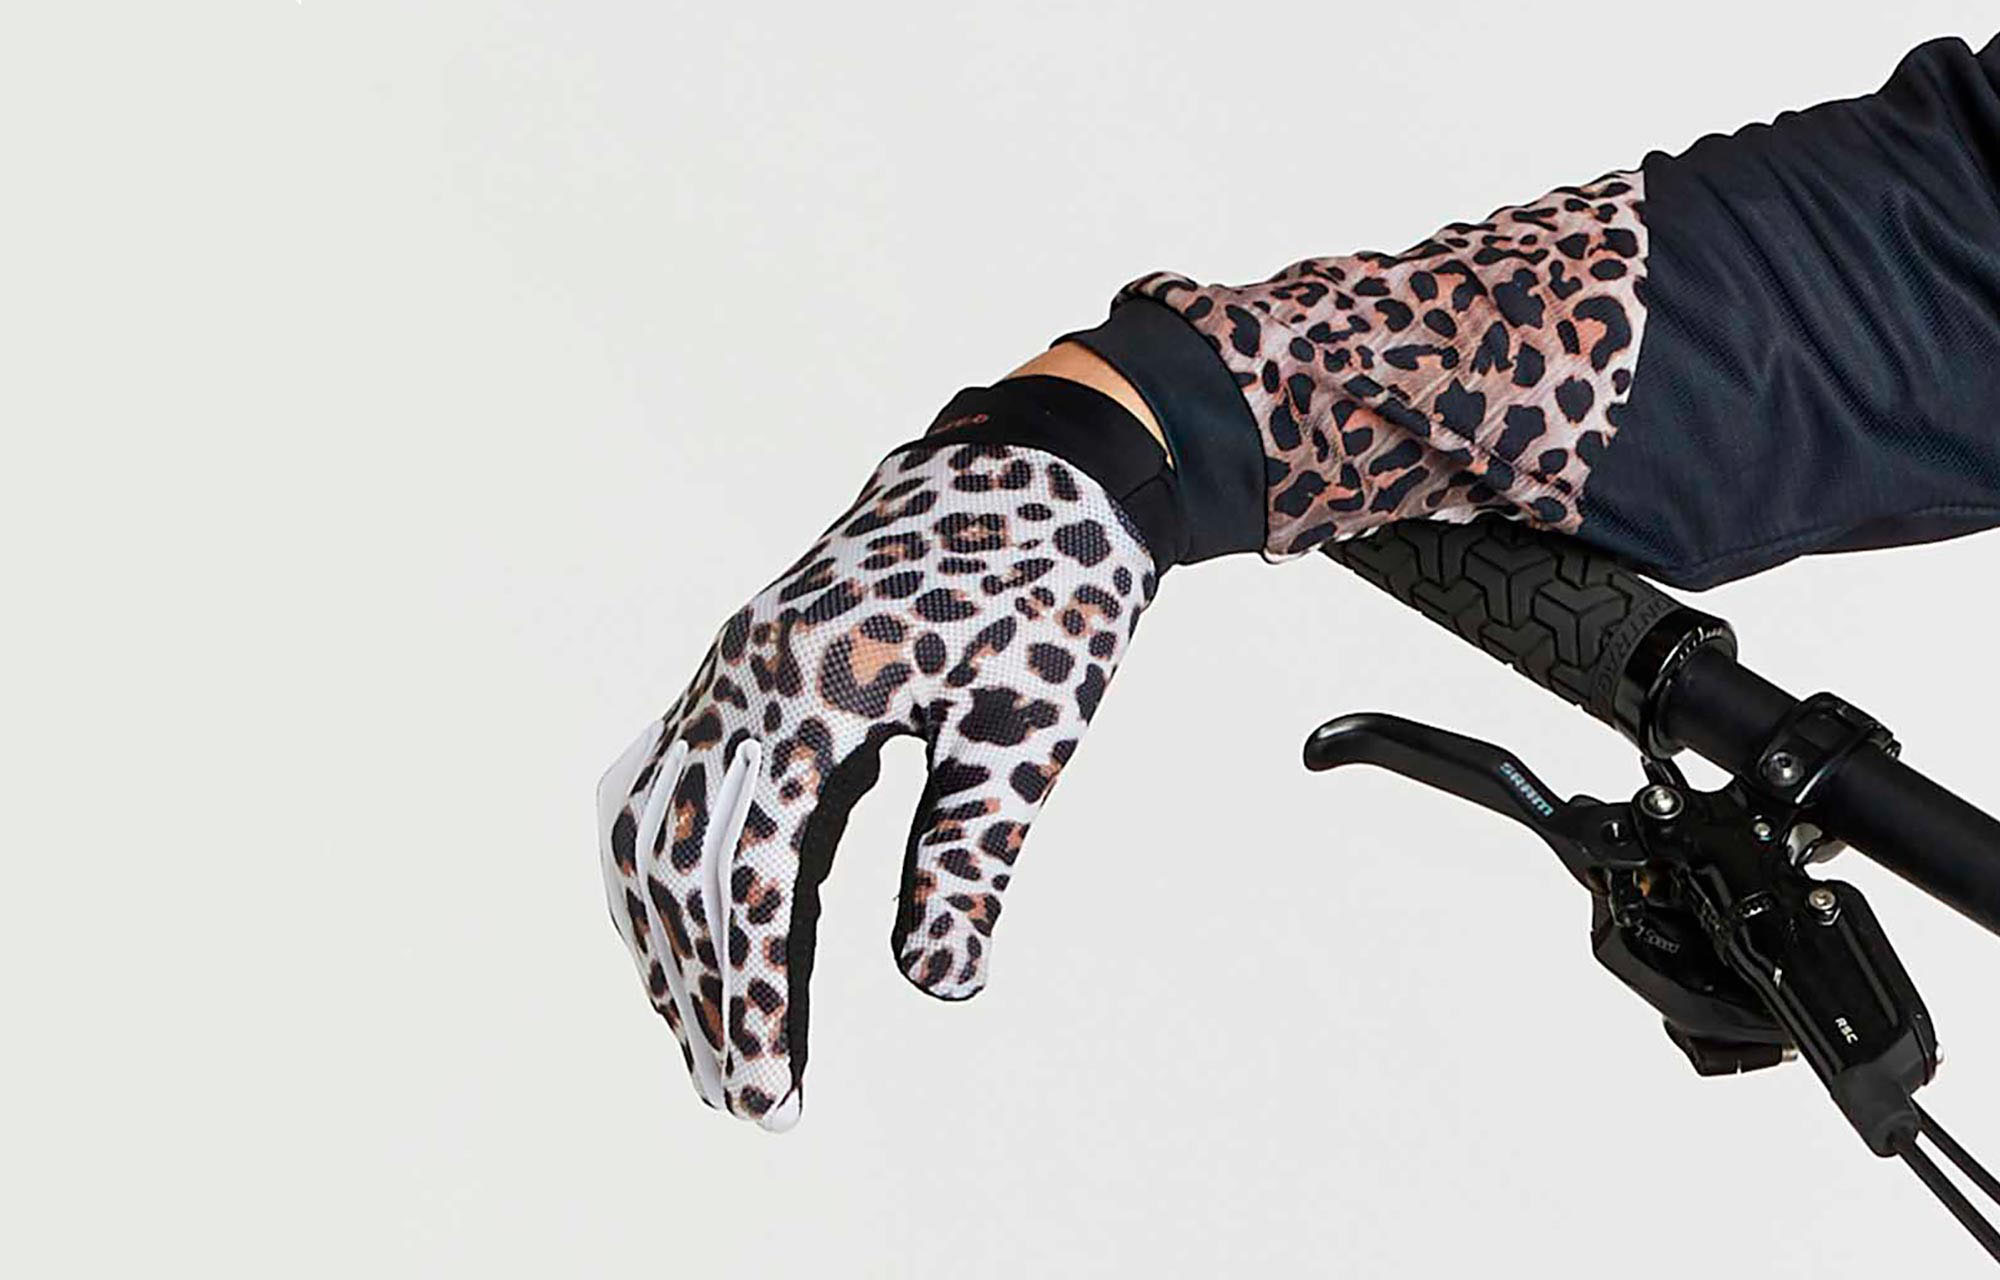 GUANTES DHARCO WOMEN LEOPARD image number 0